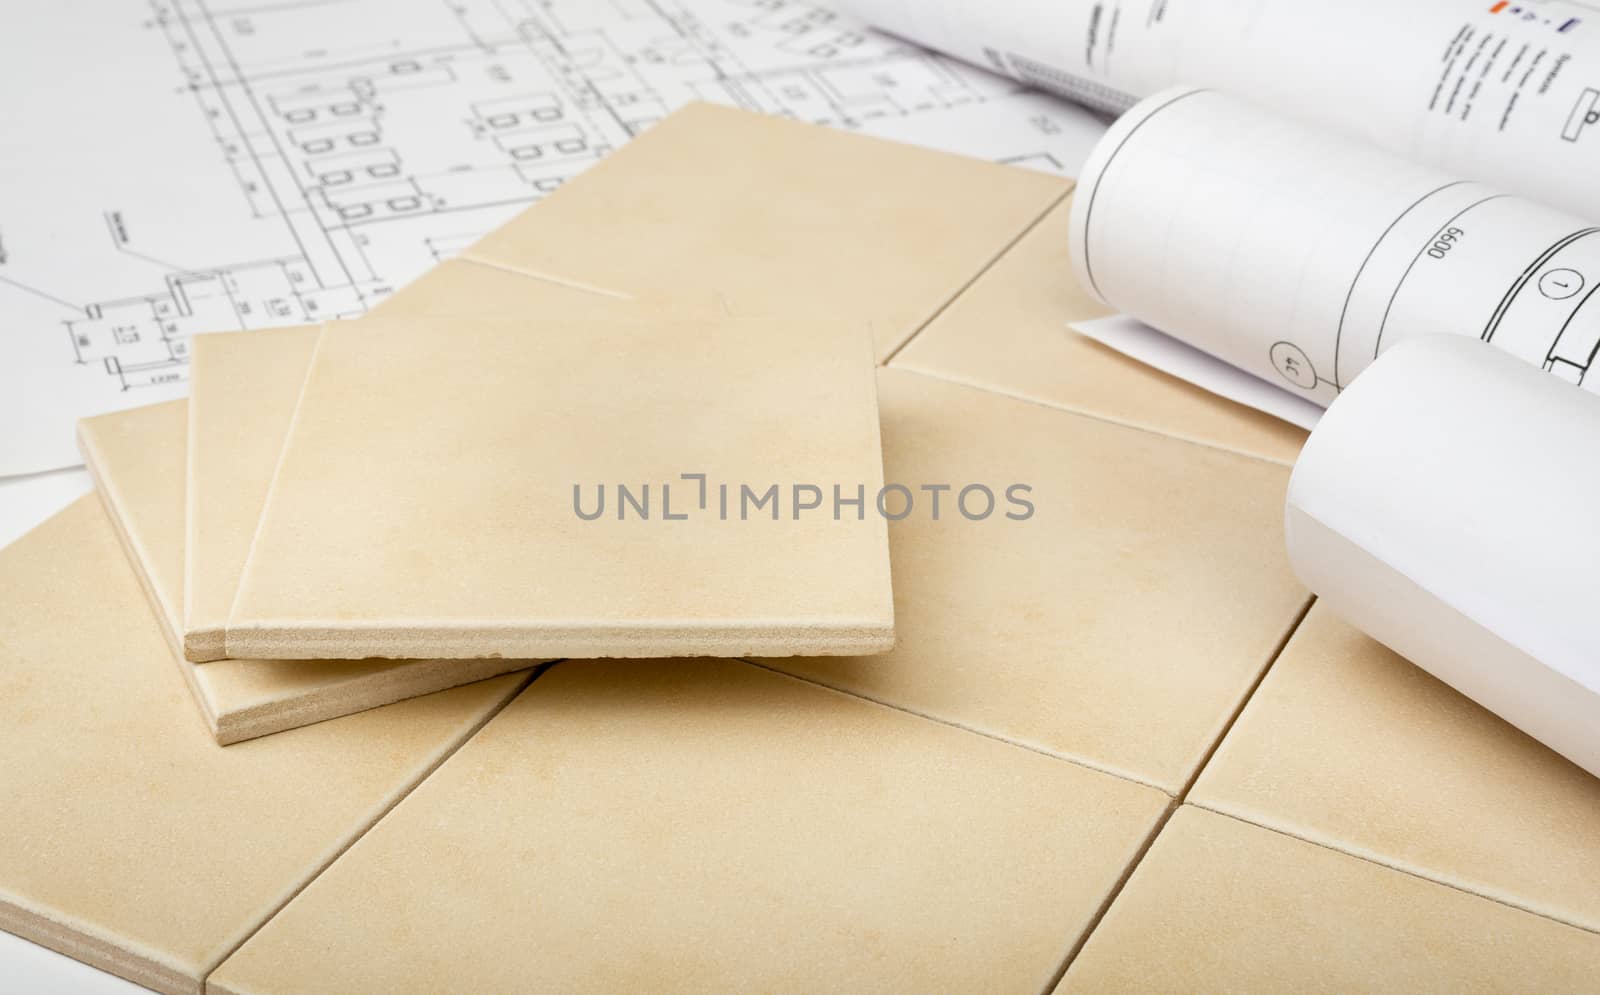 Set of tiles with blueprints, close up view